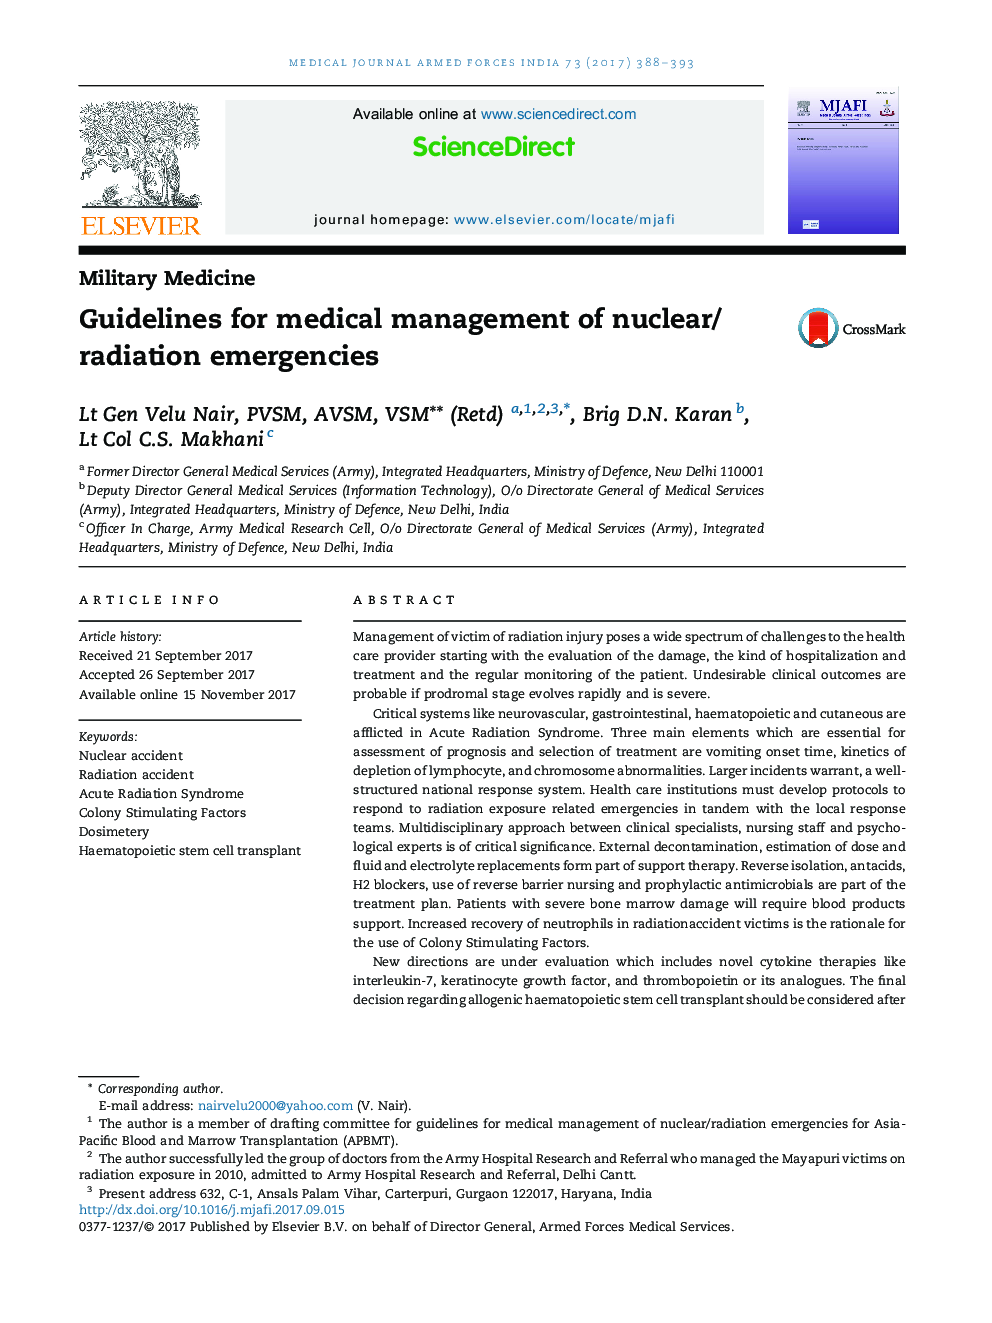 Guidelines for medical management of nuclear/radiation emergencies